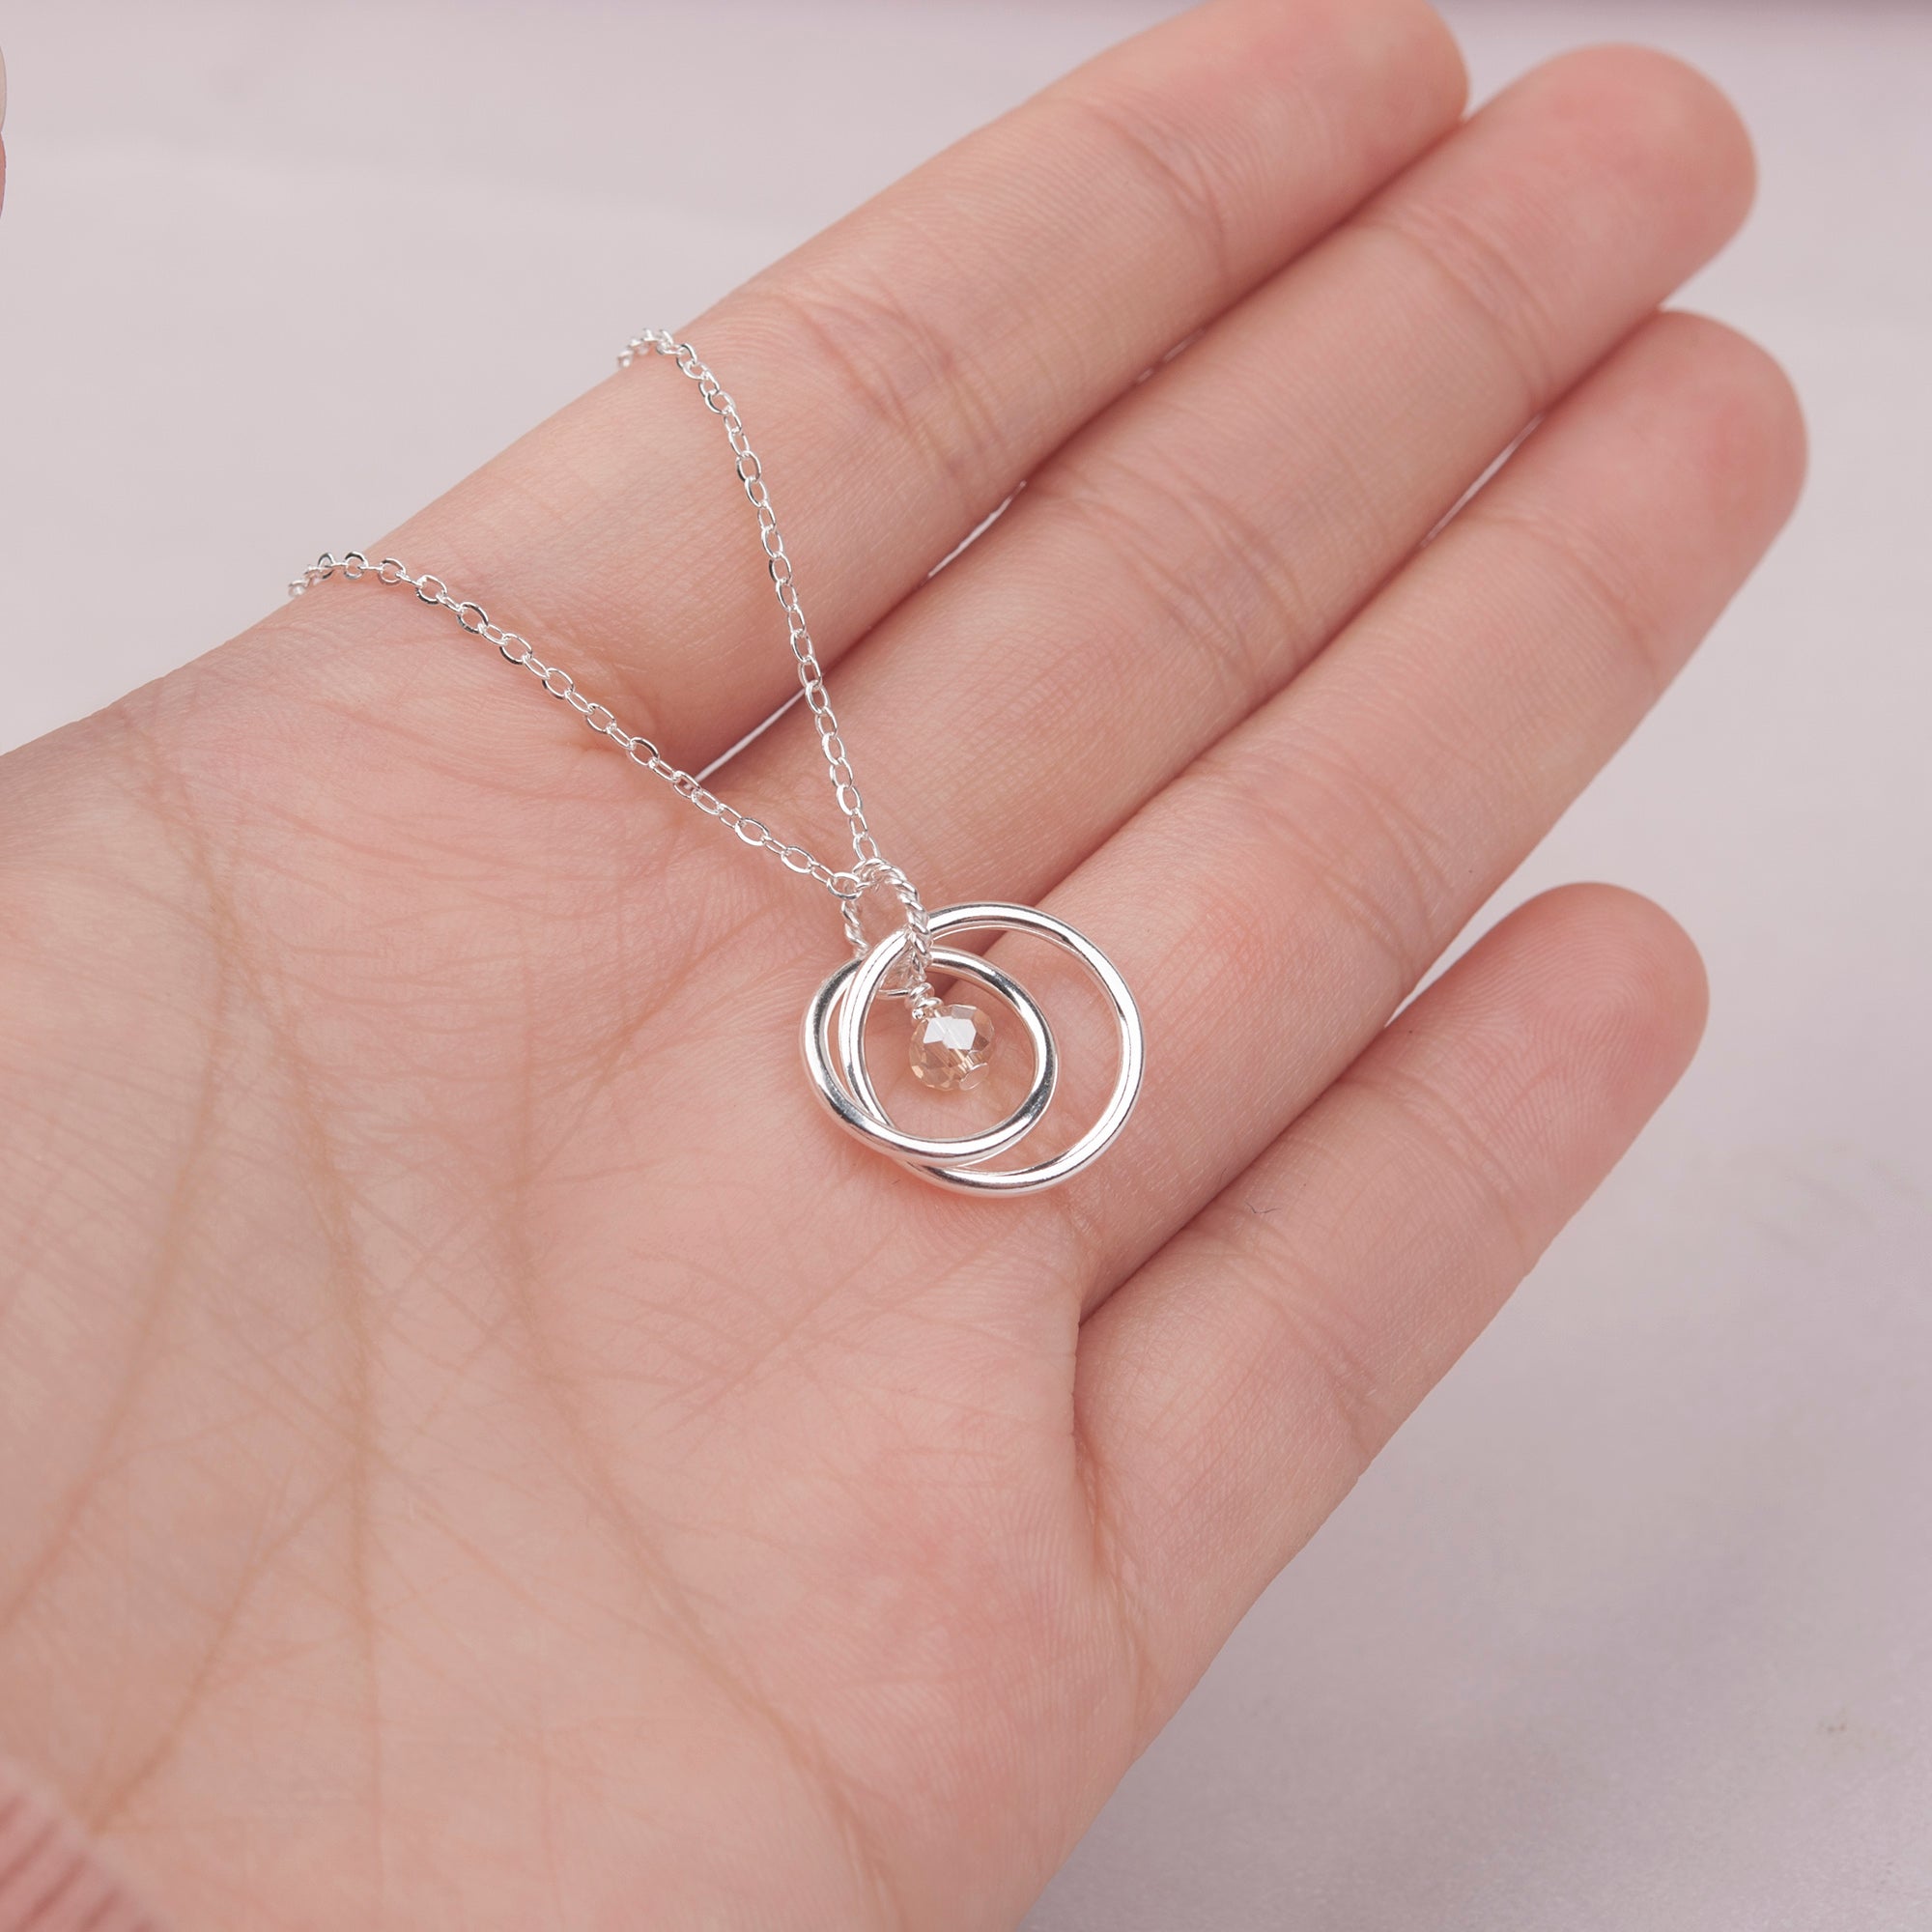 Buy SuavellSister Necklace - Sterling Silver Interlocking Double Circle  Necklace - Birthday Gift for My Big or Little Sister - Sister Gifts for 2 -  Maid of Honor Gifts From the Bride -